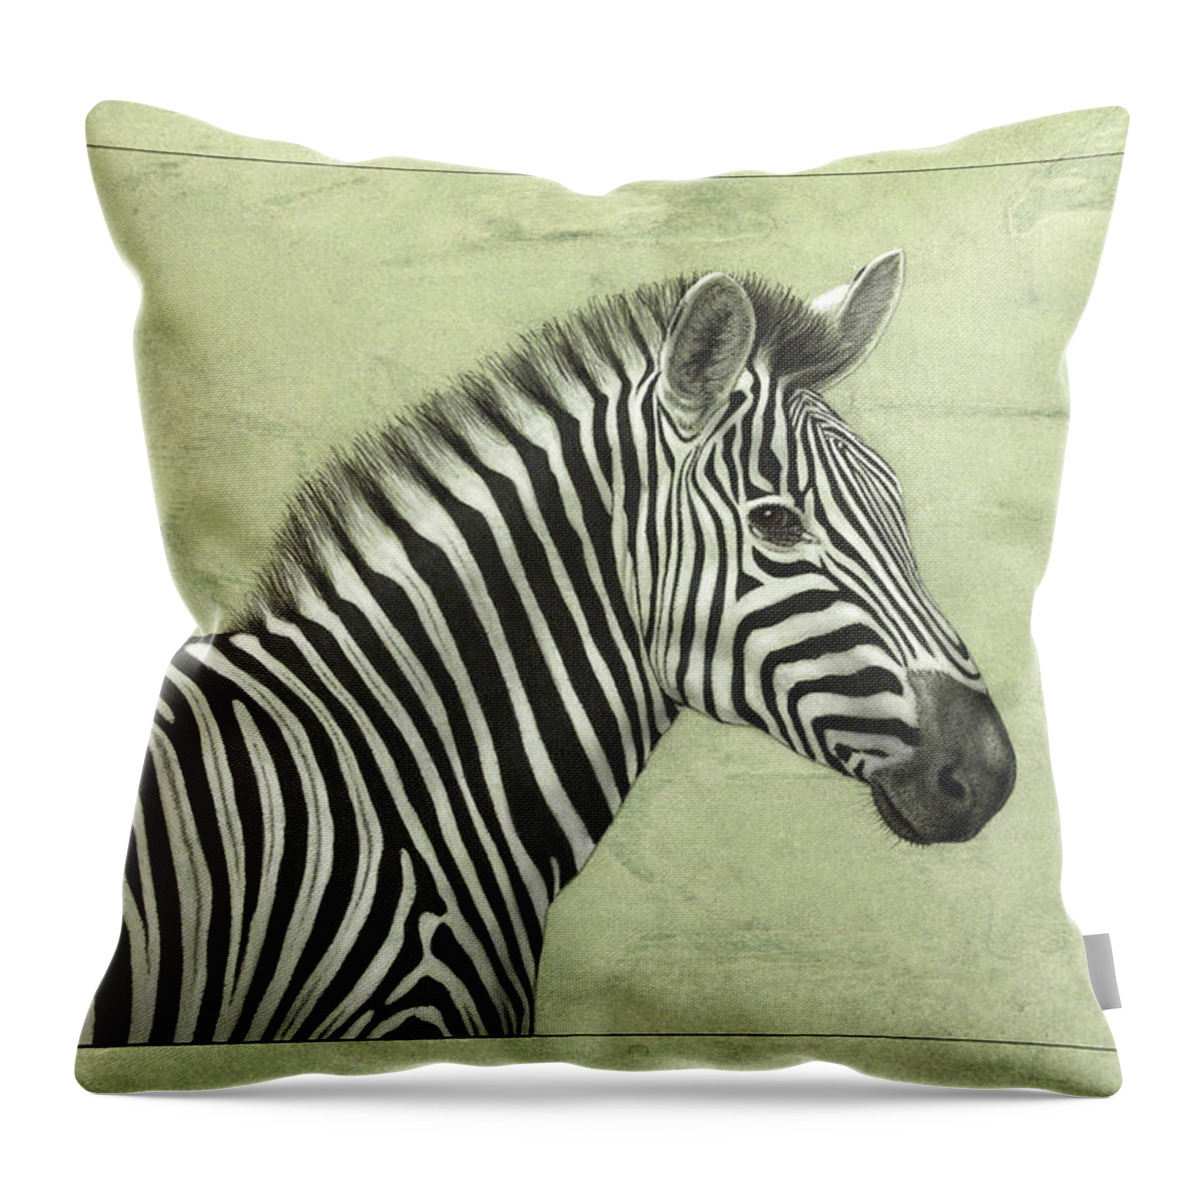 Zebra Throw Pillow featuring the painting Zebra by James W Johnson